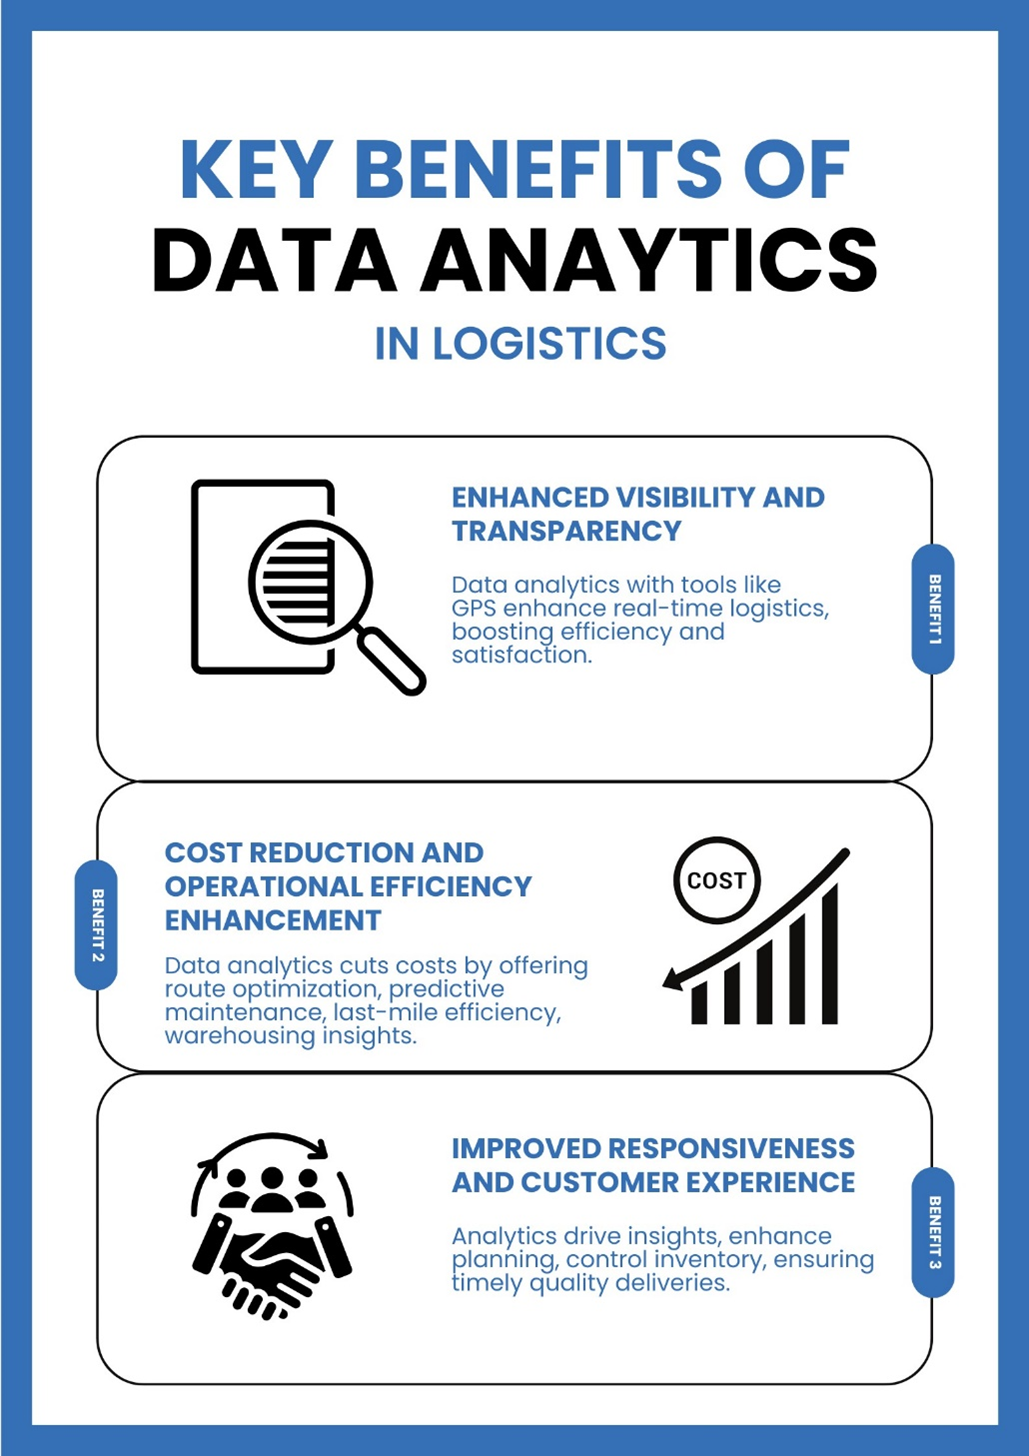 Read this infographic to understand the benefits of analytics in logistics that enhances visibility, cut costs, and elevates customer satisfaction, transforming operations for efficiency and responsiveness.